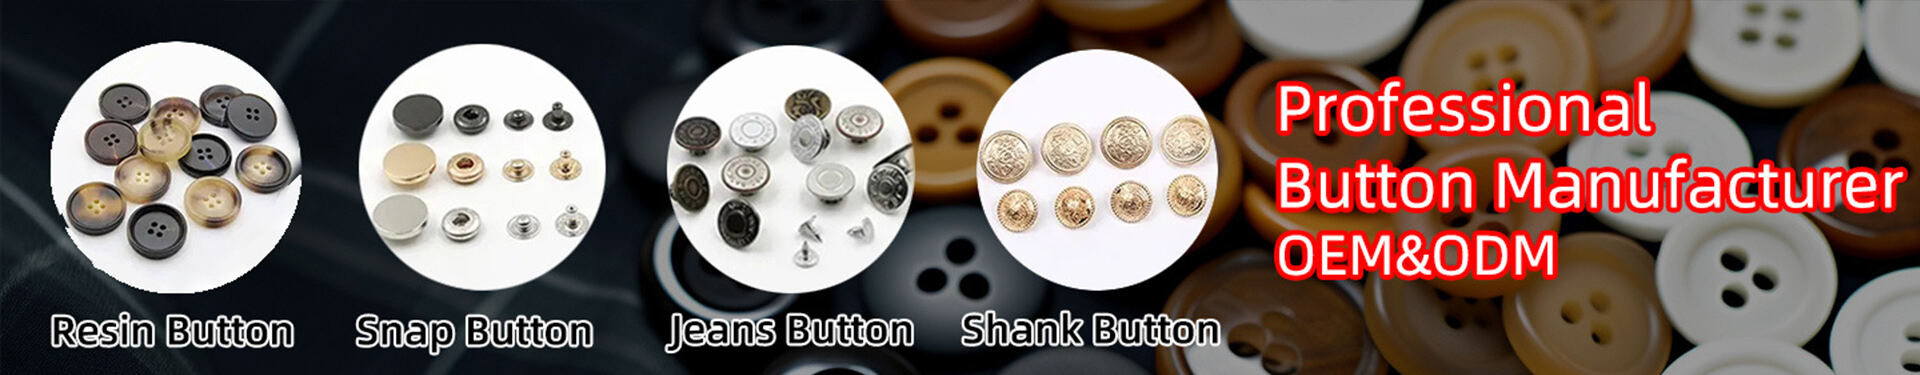 Resin/Toggle Button